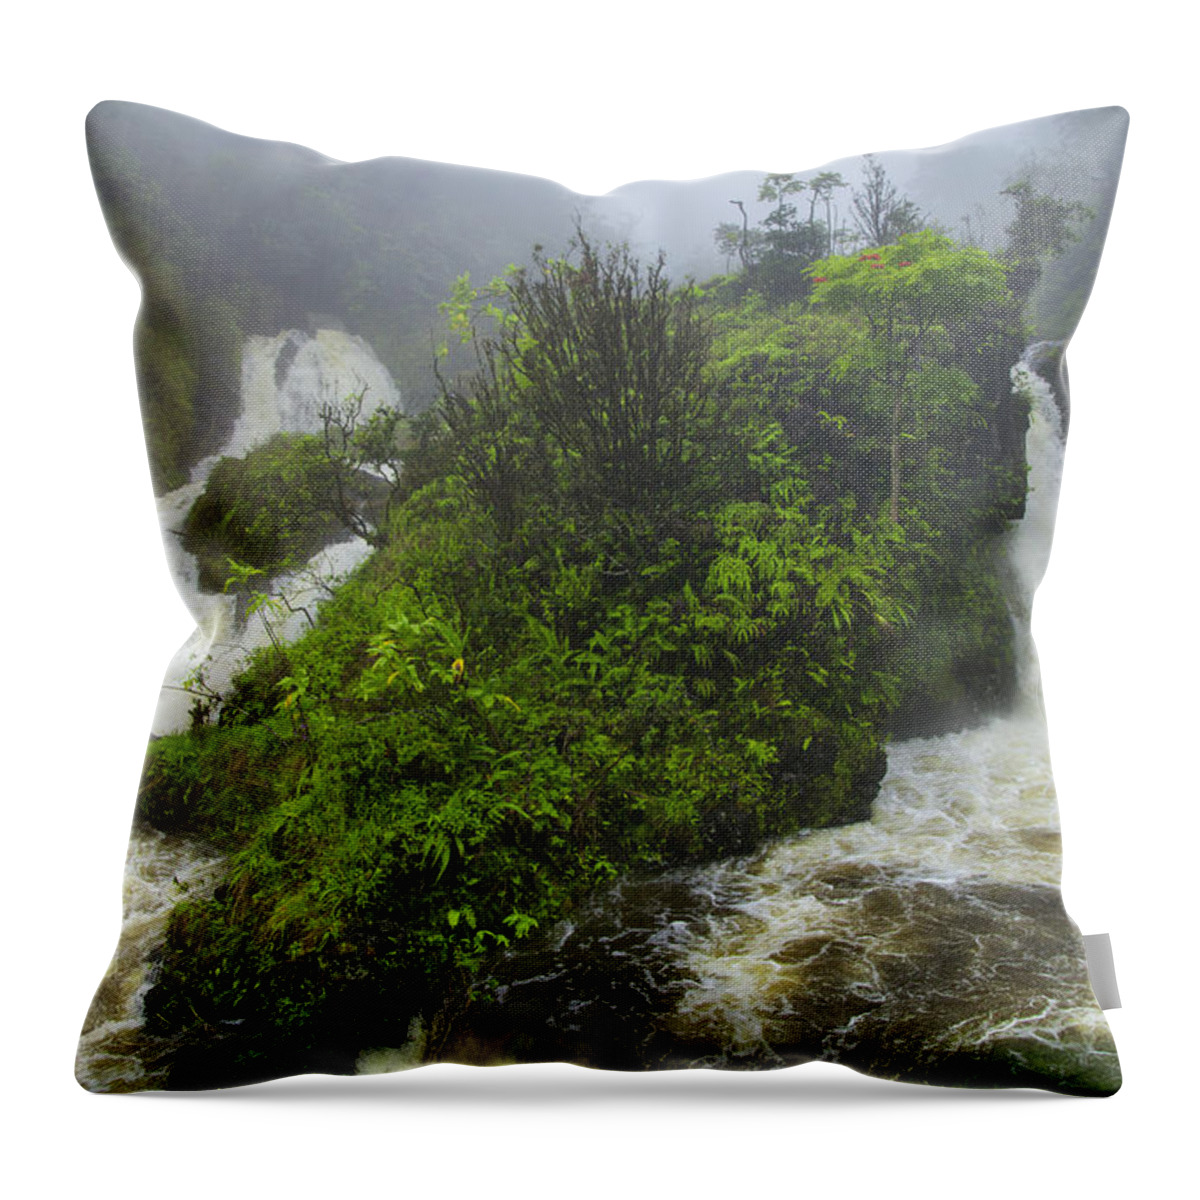 Maui Throw Pillow featuring the photograph On The Road To Hana by Theresa Tahara